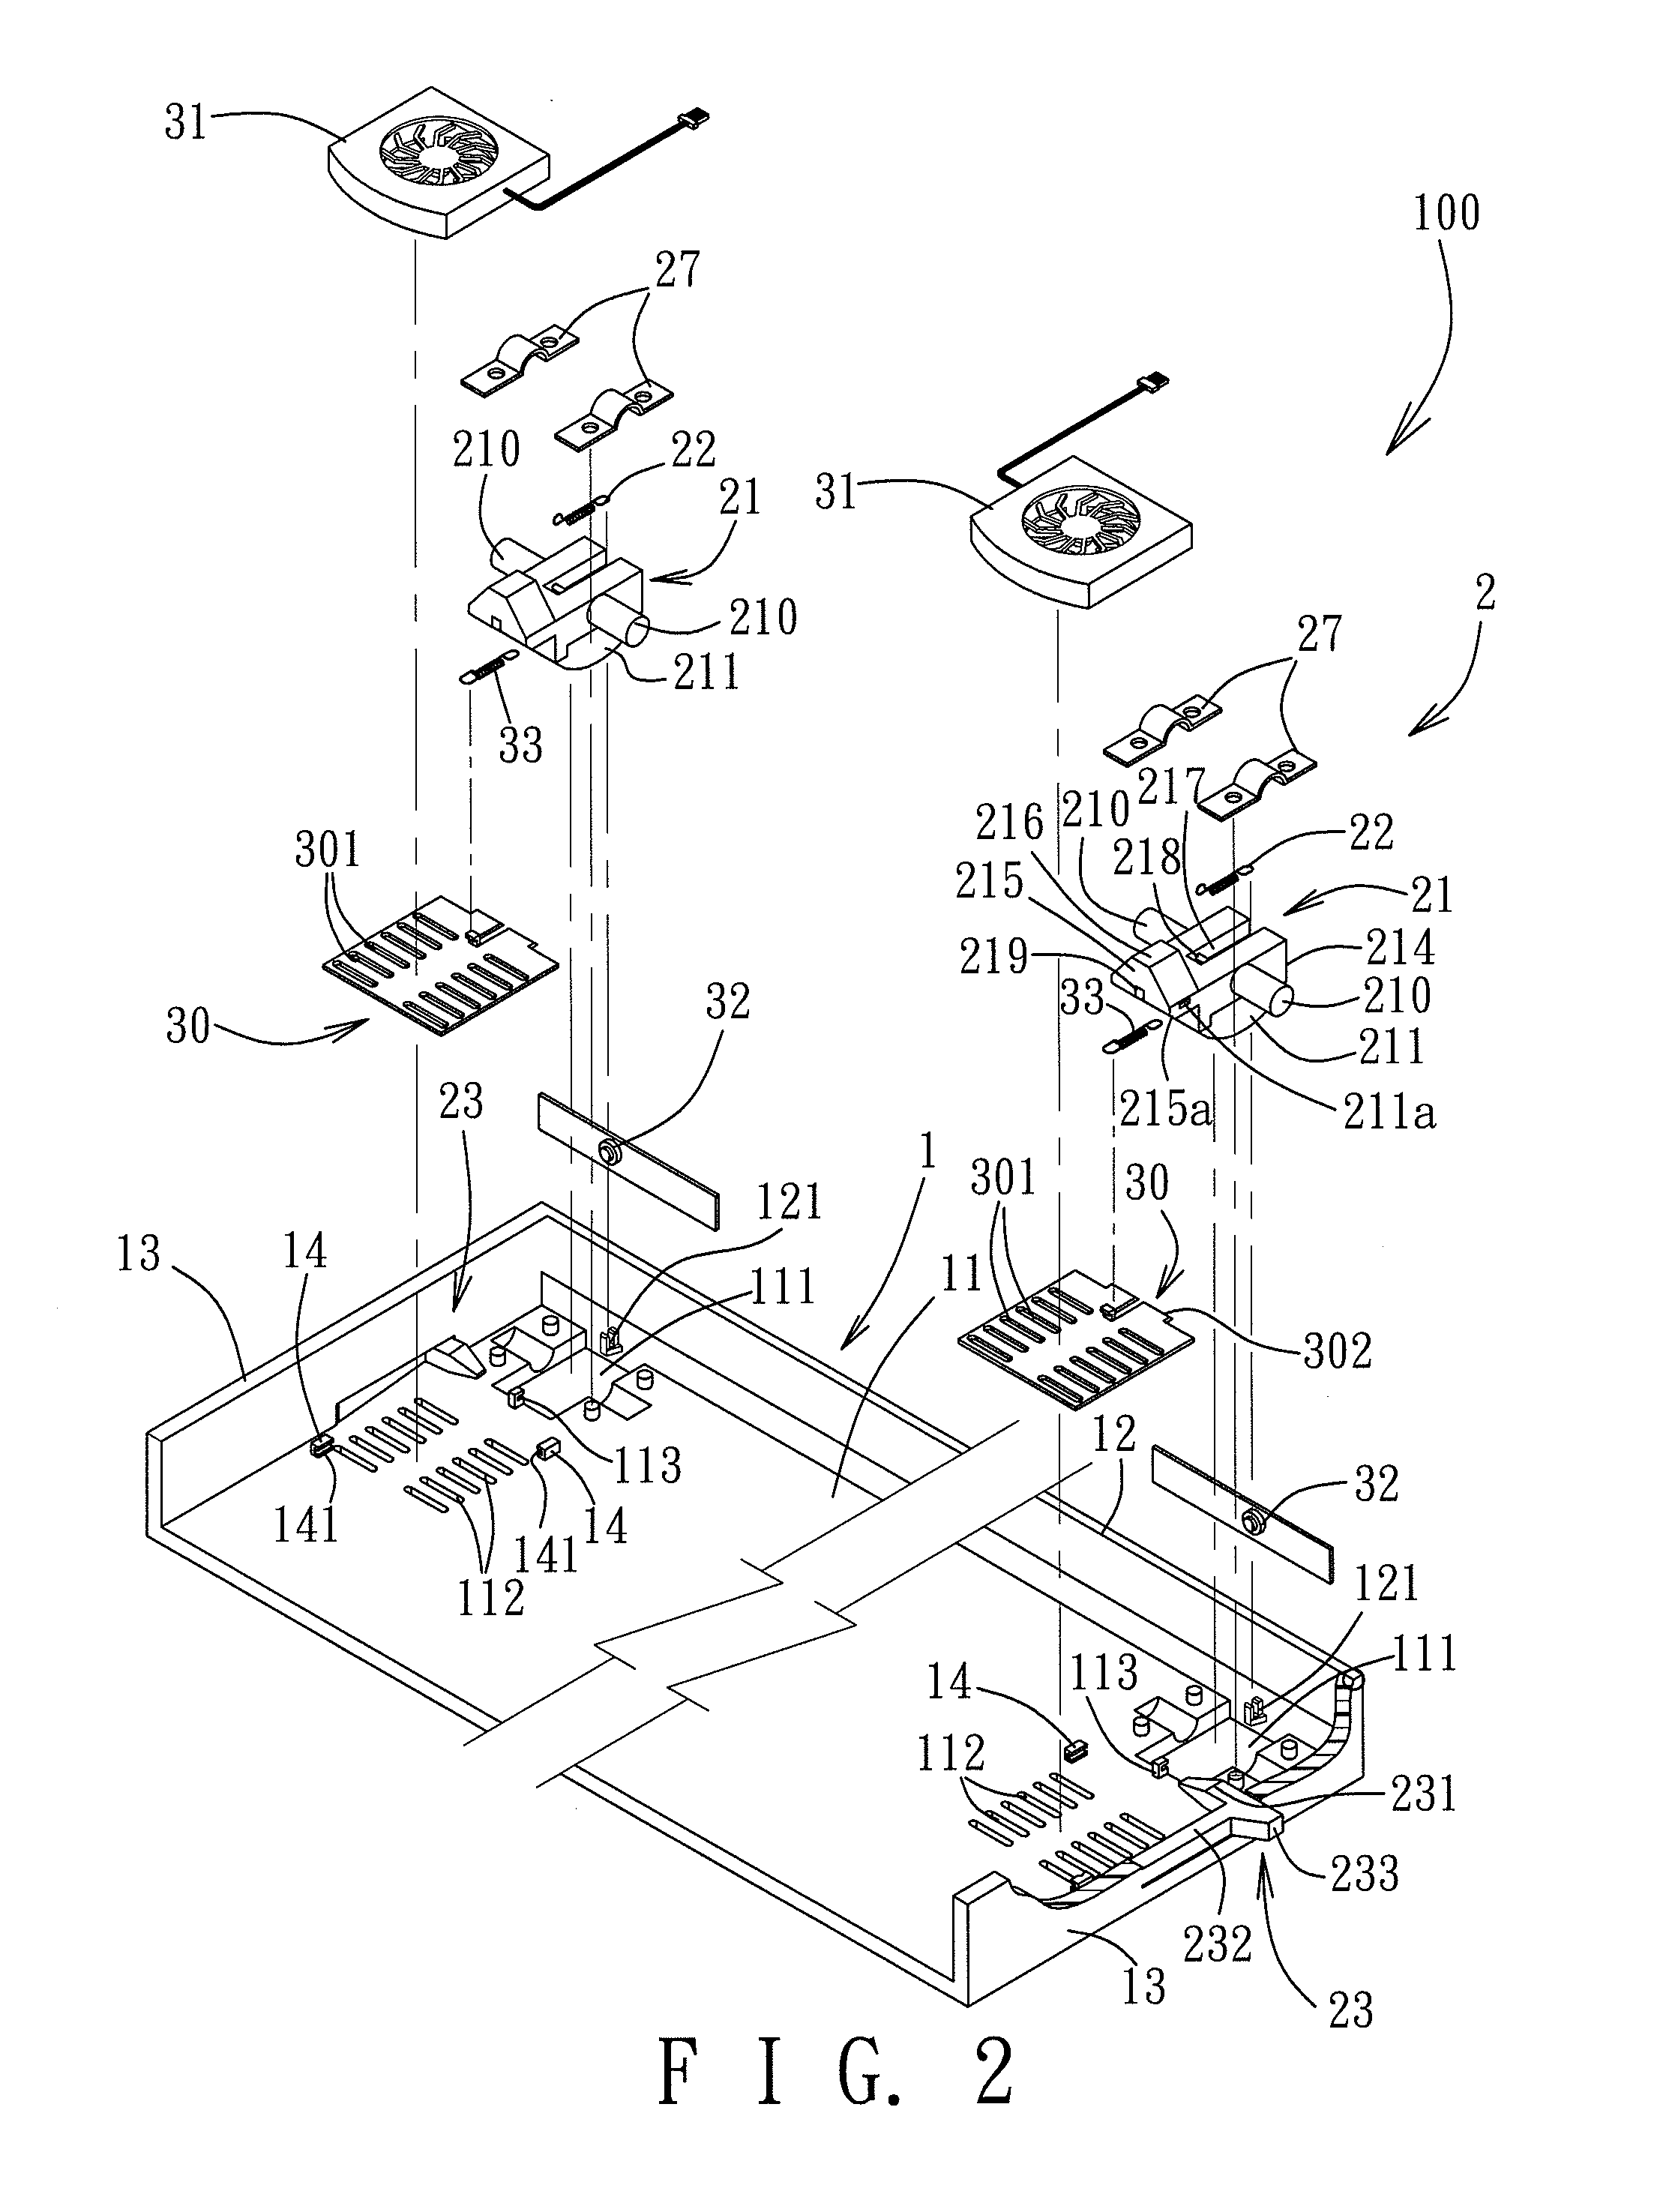 Electronic device housing having a movable foot pad mechanism